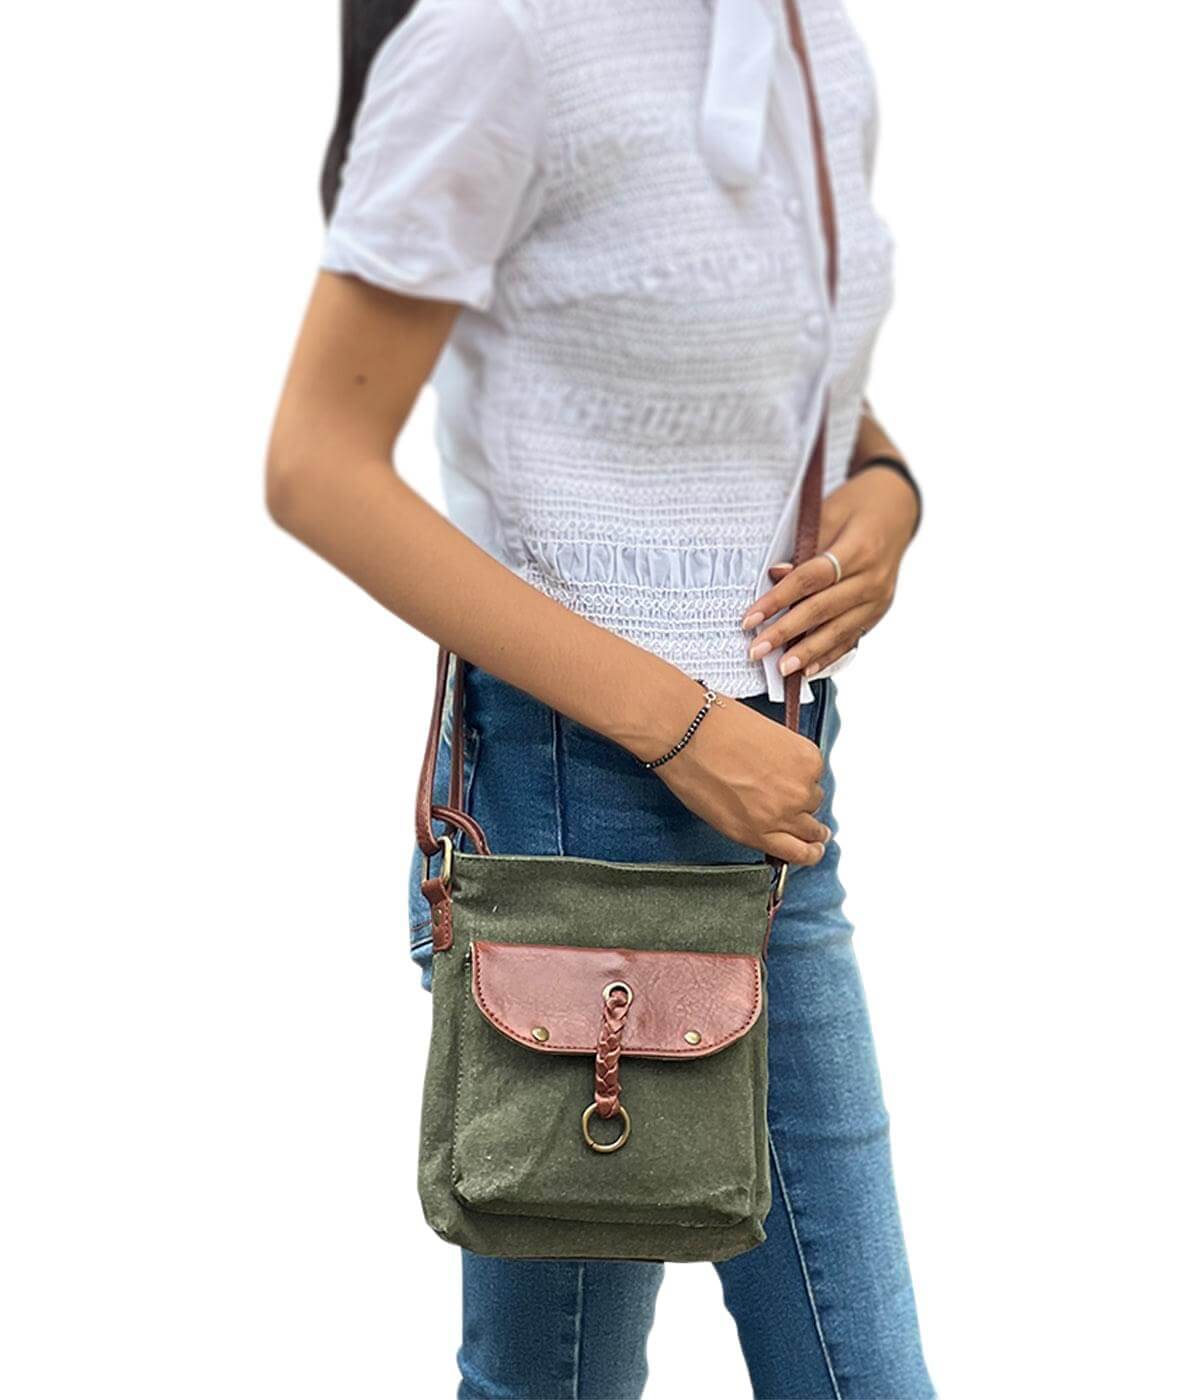 Mona B - 100% Cotton Canvas Small Messenger Crossbody Vintage Sling Bag with Stylish Design for Women (Forest Green) MonaB India